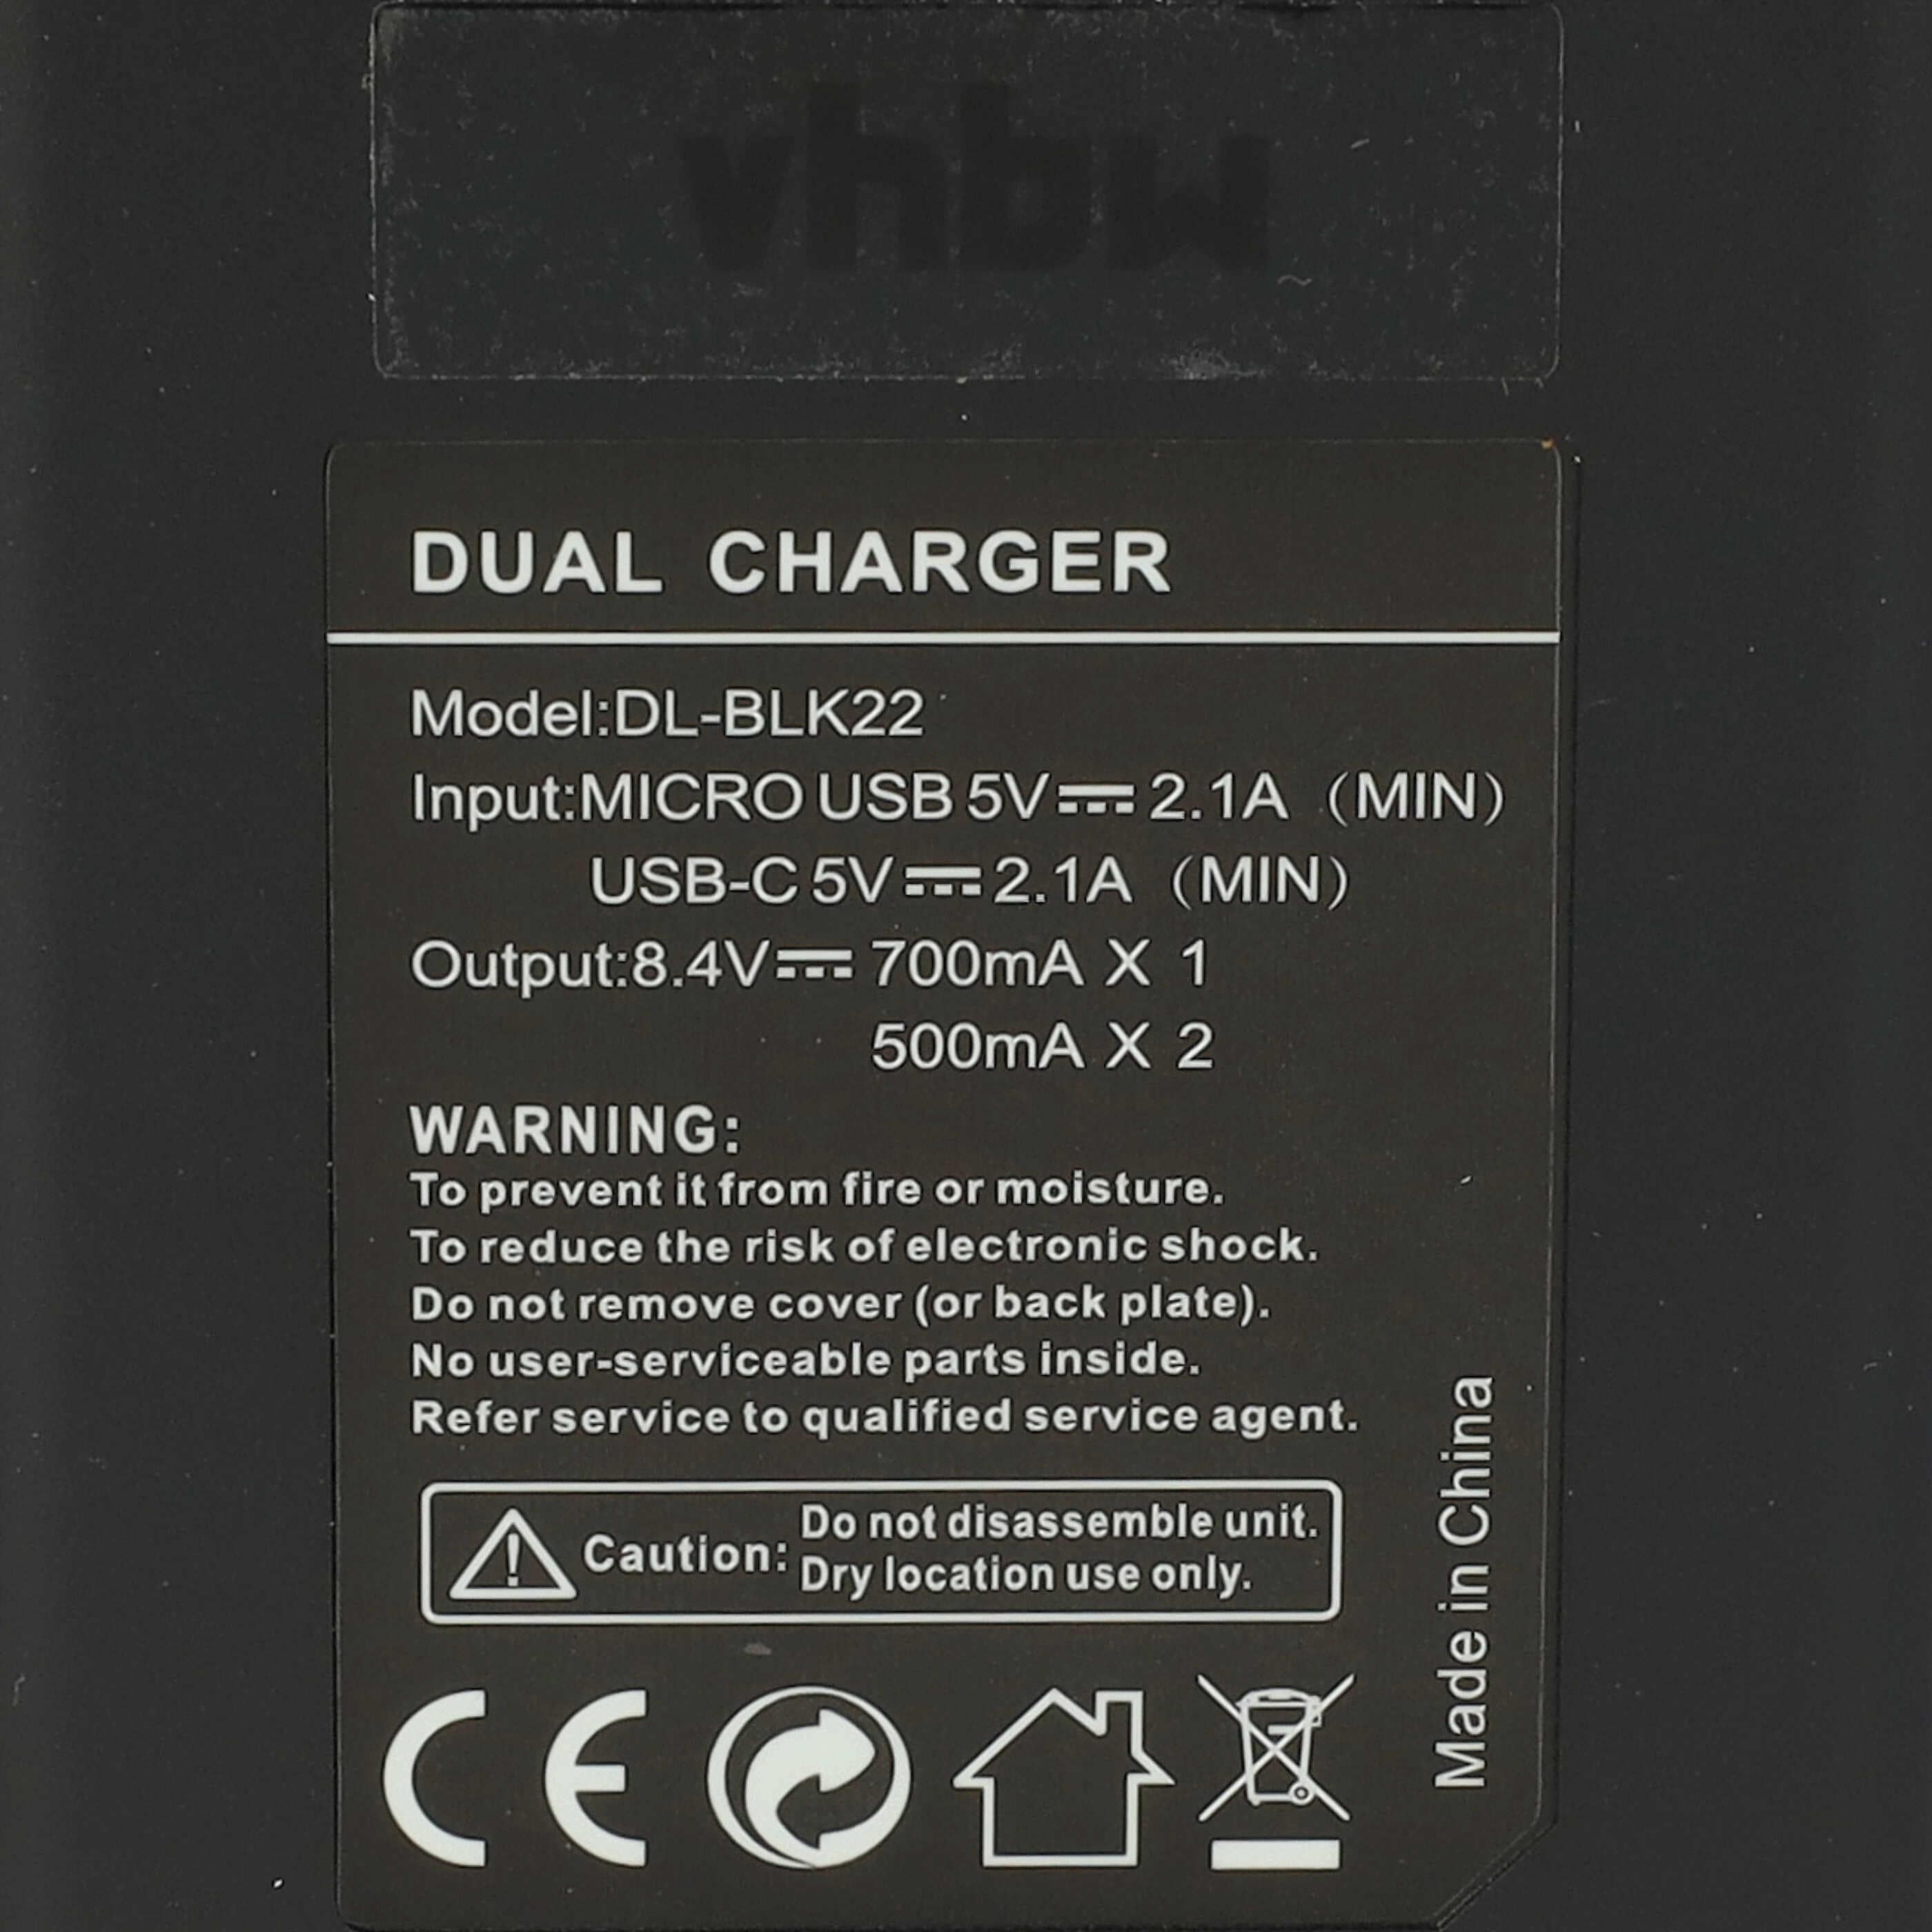 Battery Charger suitable for Panasonic DC-G9 Camera 8.4 V